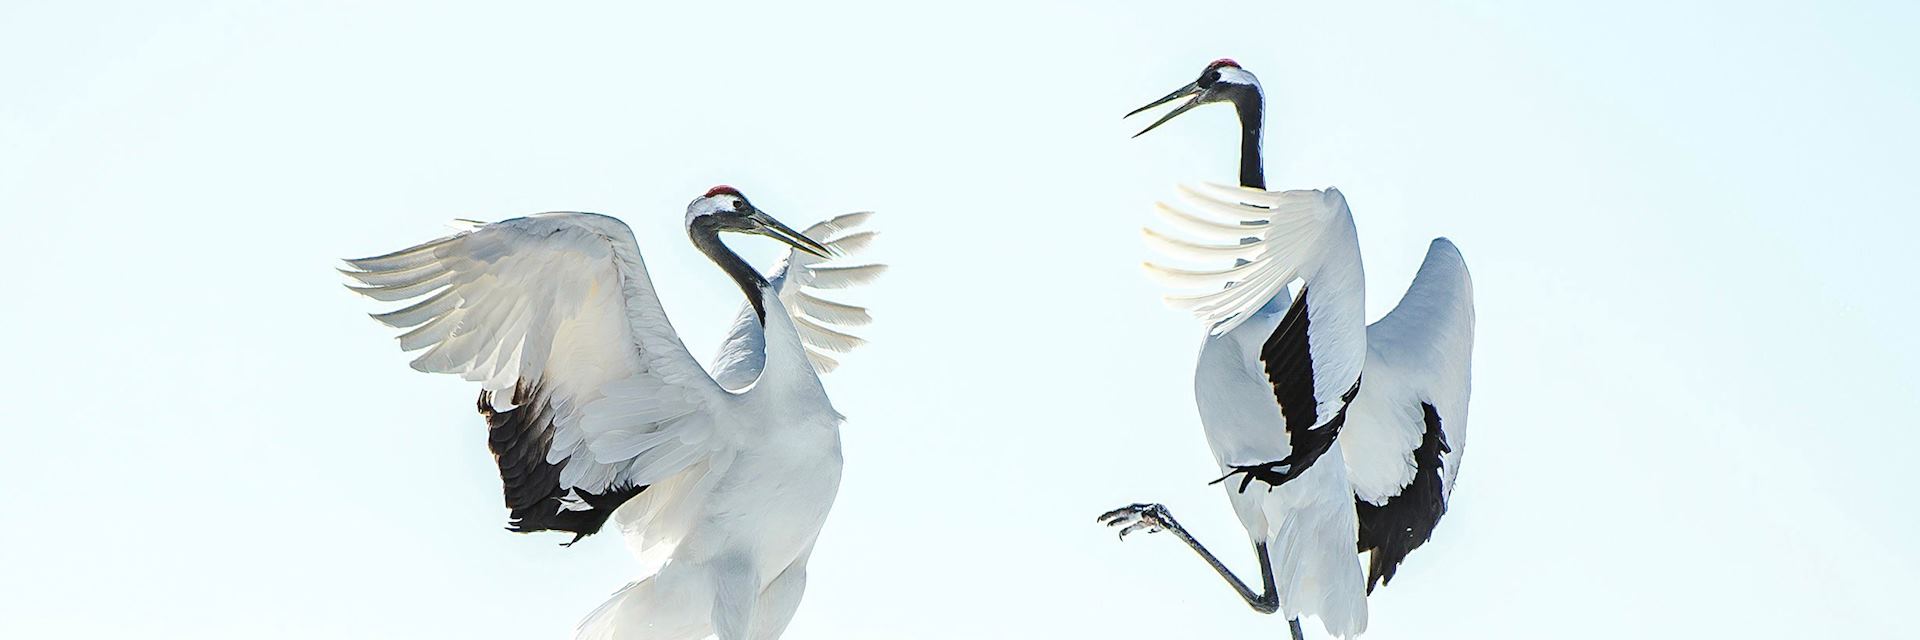 Red-crested crane mating ritual